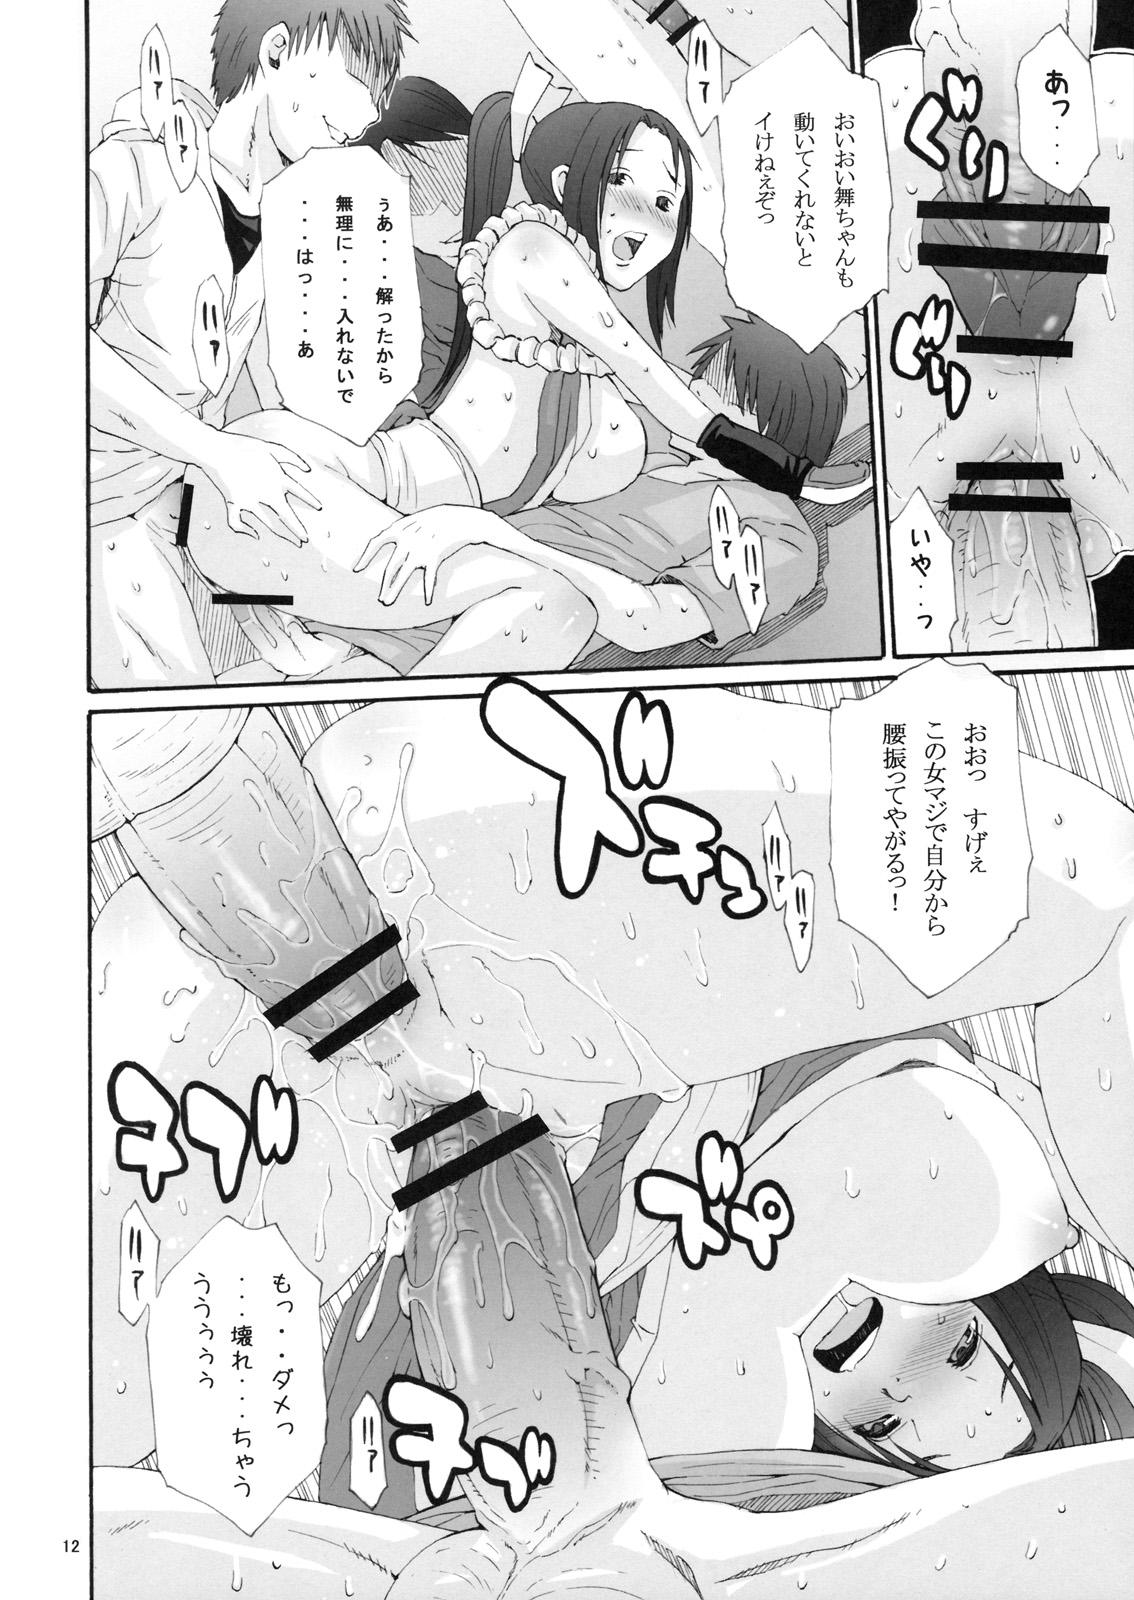 With DOF Mai - King of fighters Strapon - Page 11